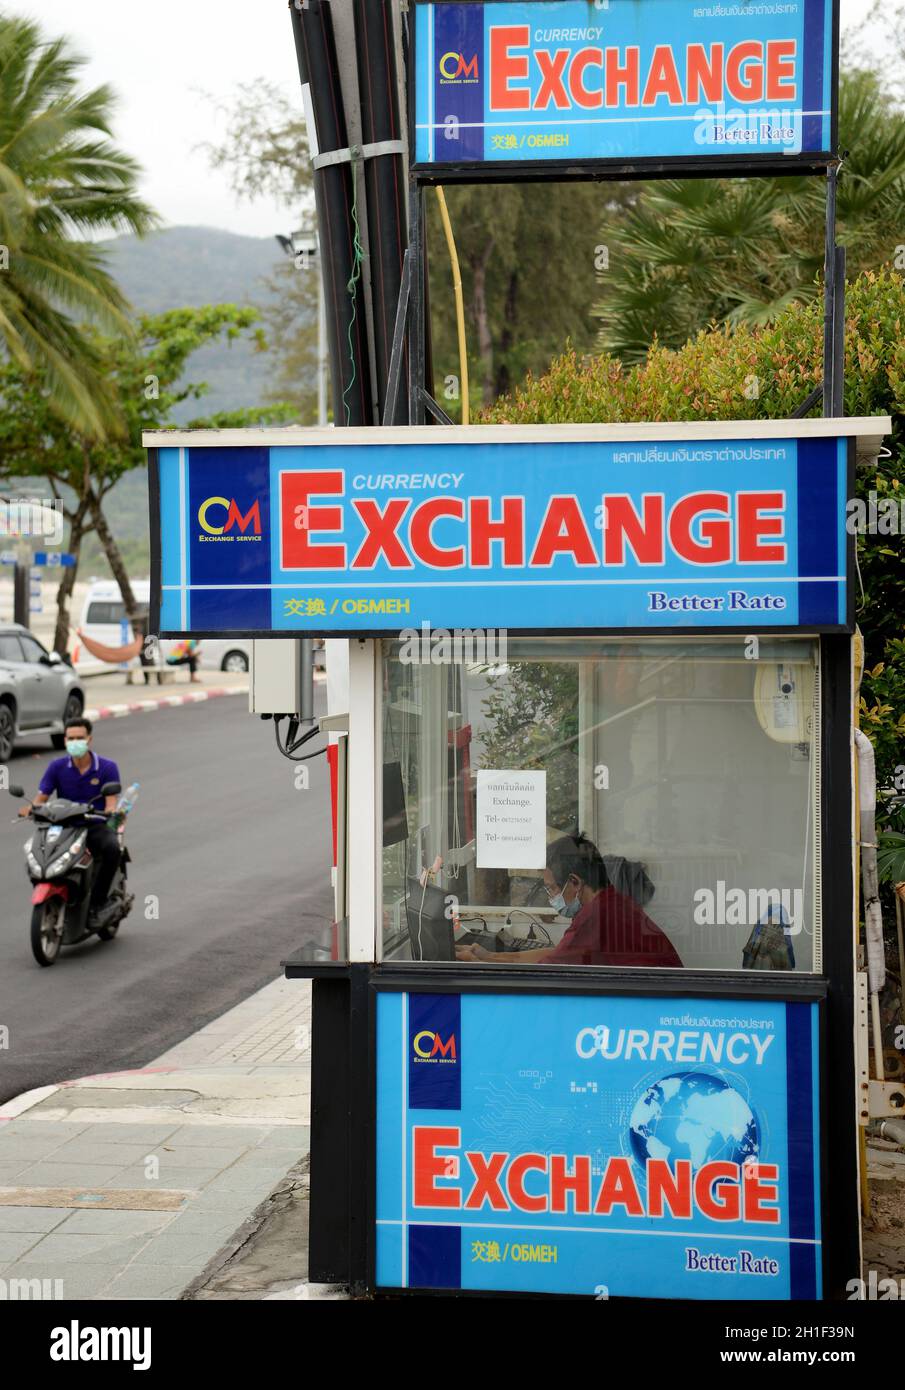 Patong, Thailand. 17th Oct, 2021. A currency exchange booth seen along the Patong Beach. Thailand's Phuket Island has a 7 day quarantine period for vaccinated foreign tourists and locals, called the Phuket Sandbox. After a successful negative PCR test visitors are permitted to travel around the island during their quarantine. Thailand will allow fully vaccinated visitors from low-risk countries to enter the kingdom without quarantine from November 1 as a key effort by the government to boost the economy. Credit: SOPA Images Limited/Alamy Live News Stock Photo